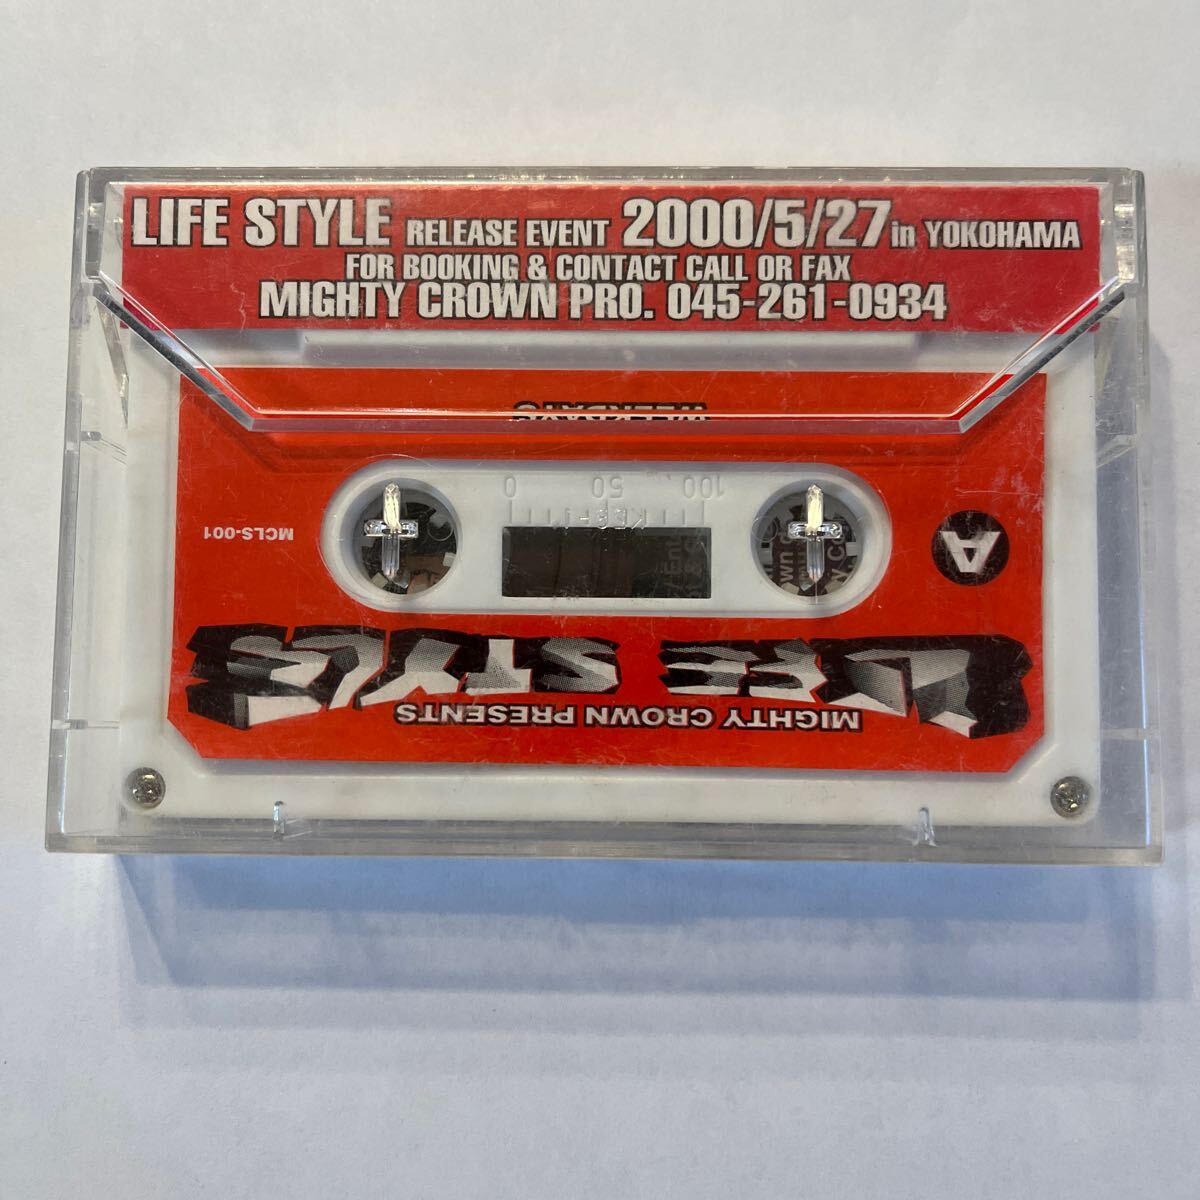  cassette tape MIGHTY CROWN PRESENTS LIFE STYLE / JAPANESE REGGAE / MIX TAPE